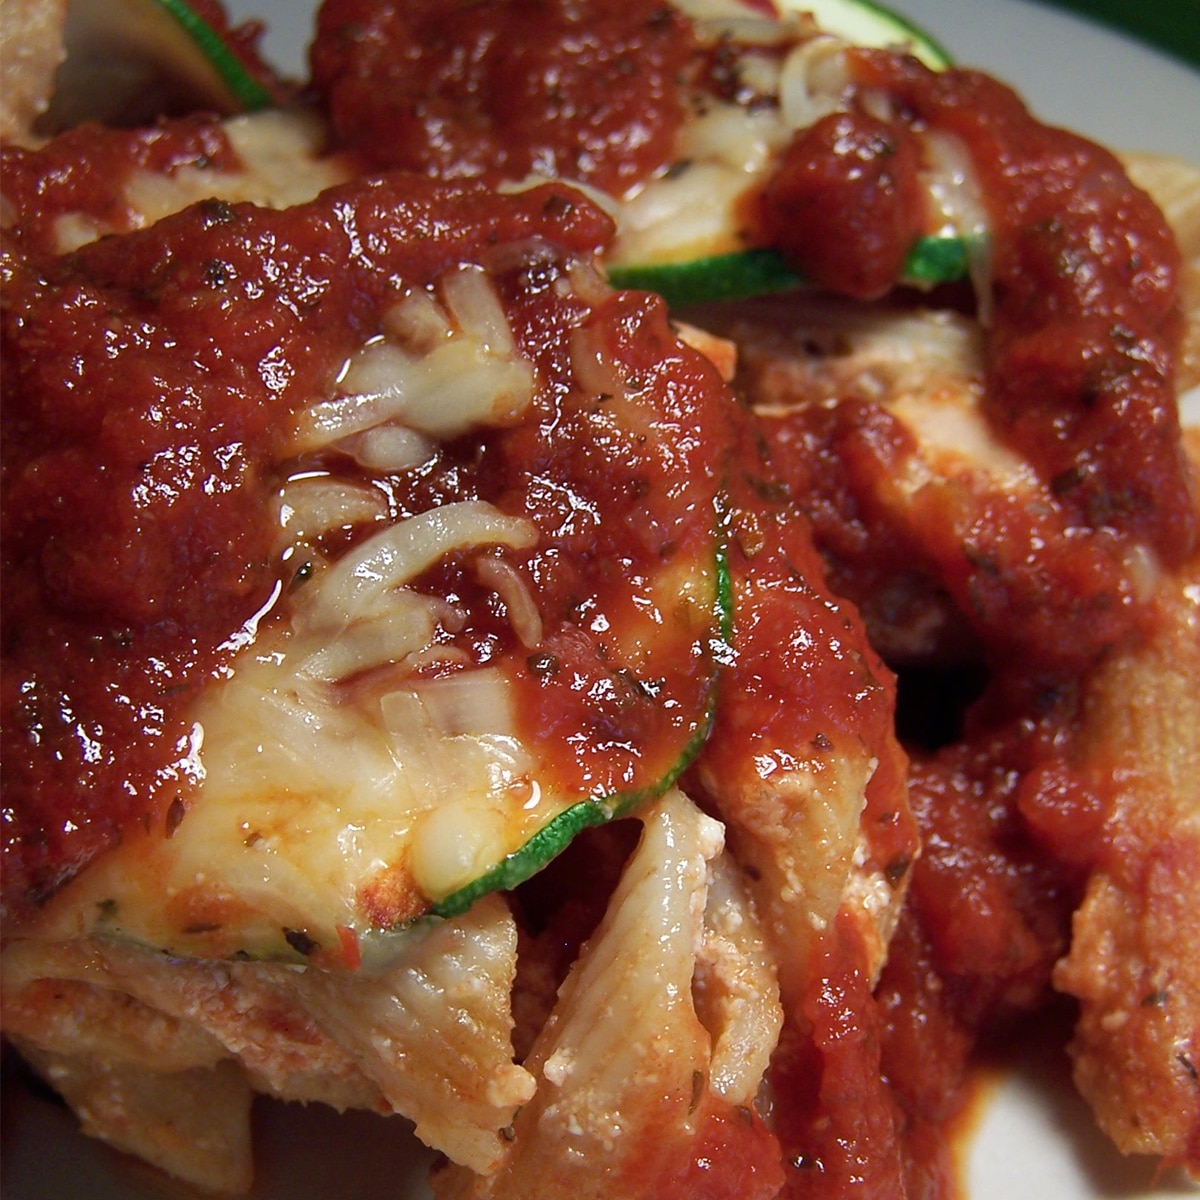 baked rigatoni featured